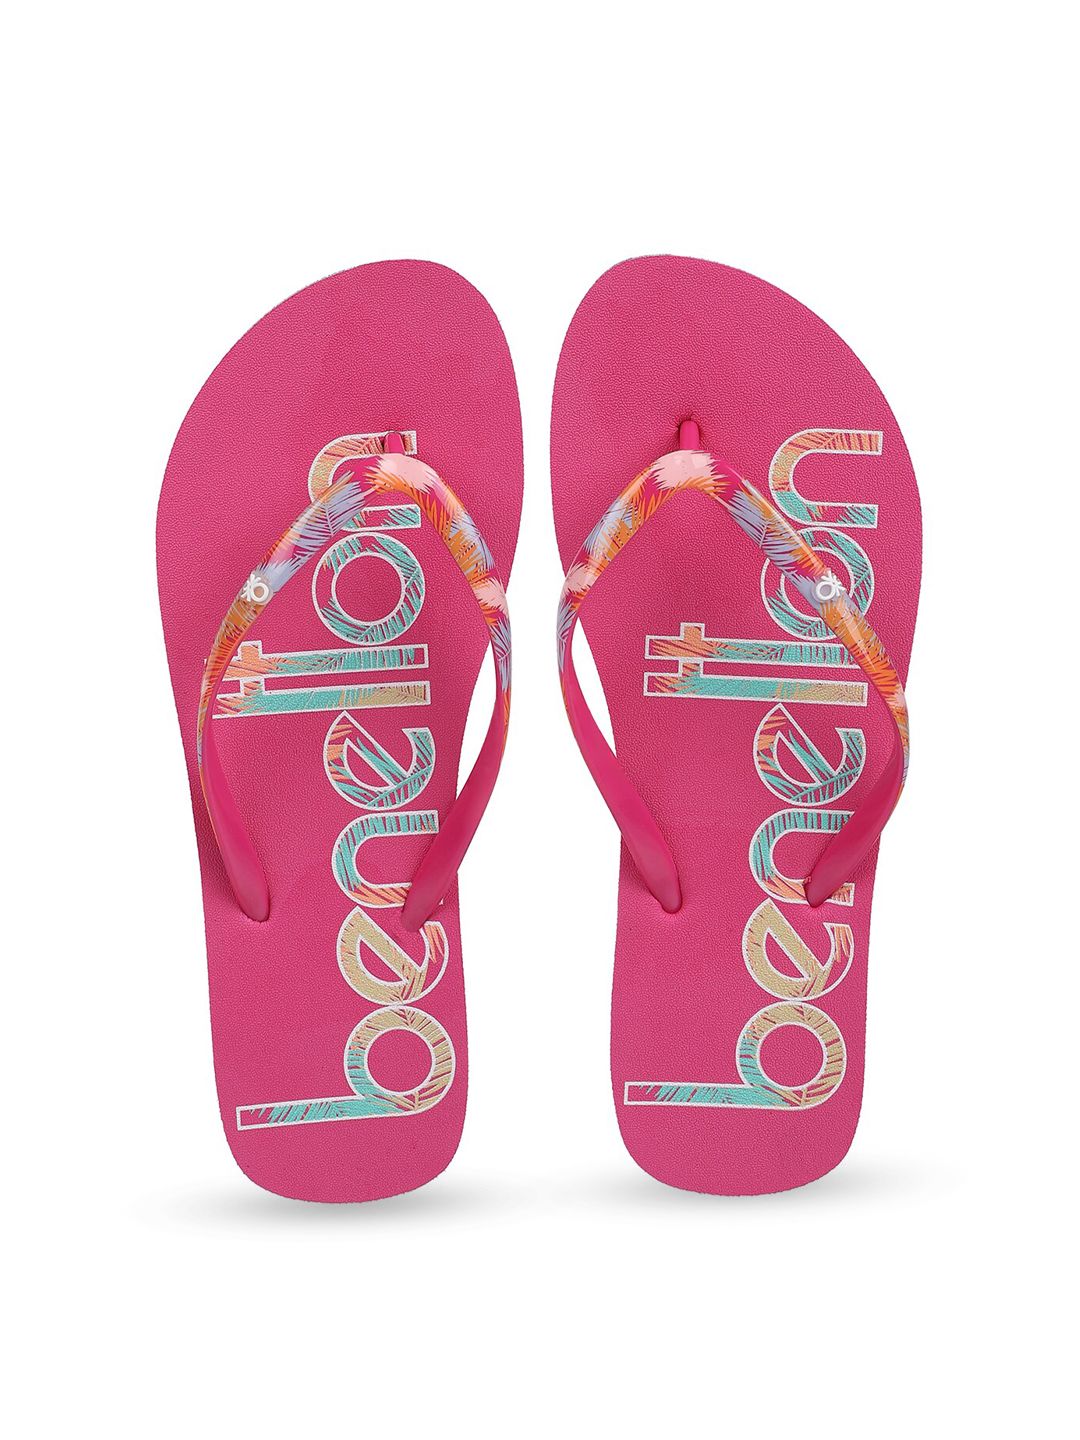 United Colors of Benetton Women Fuchsia & Blue Printed Rubber Thong Flip-Flops Price in India